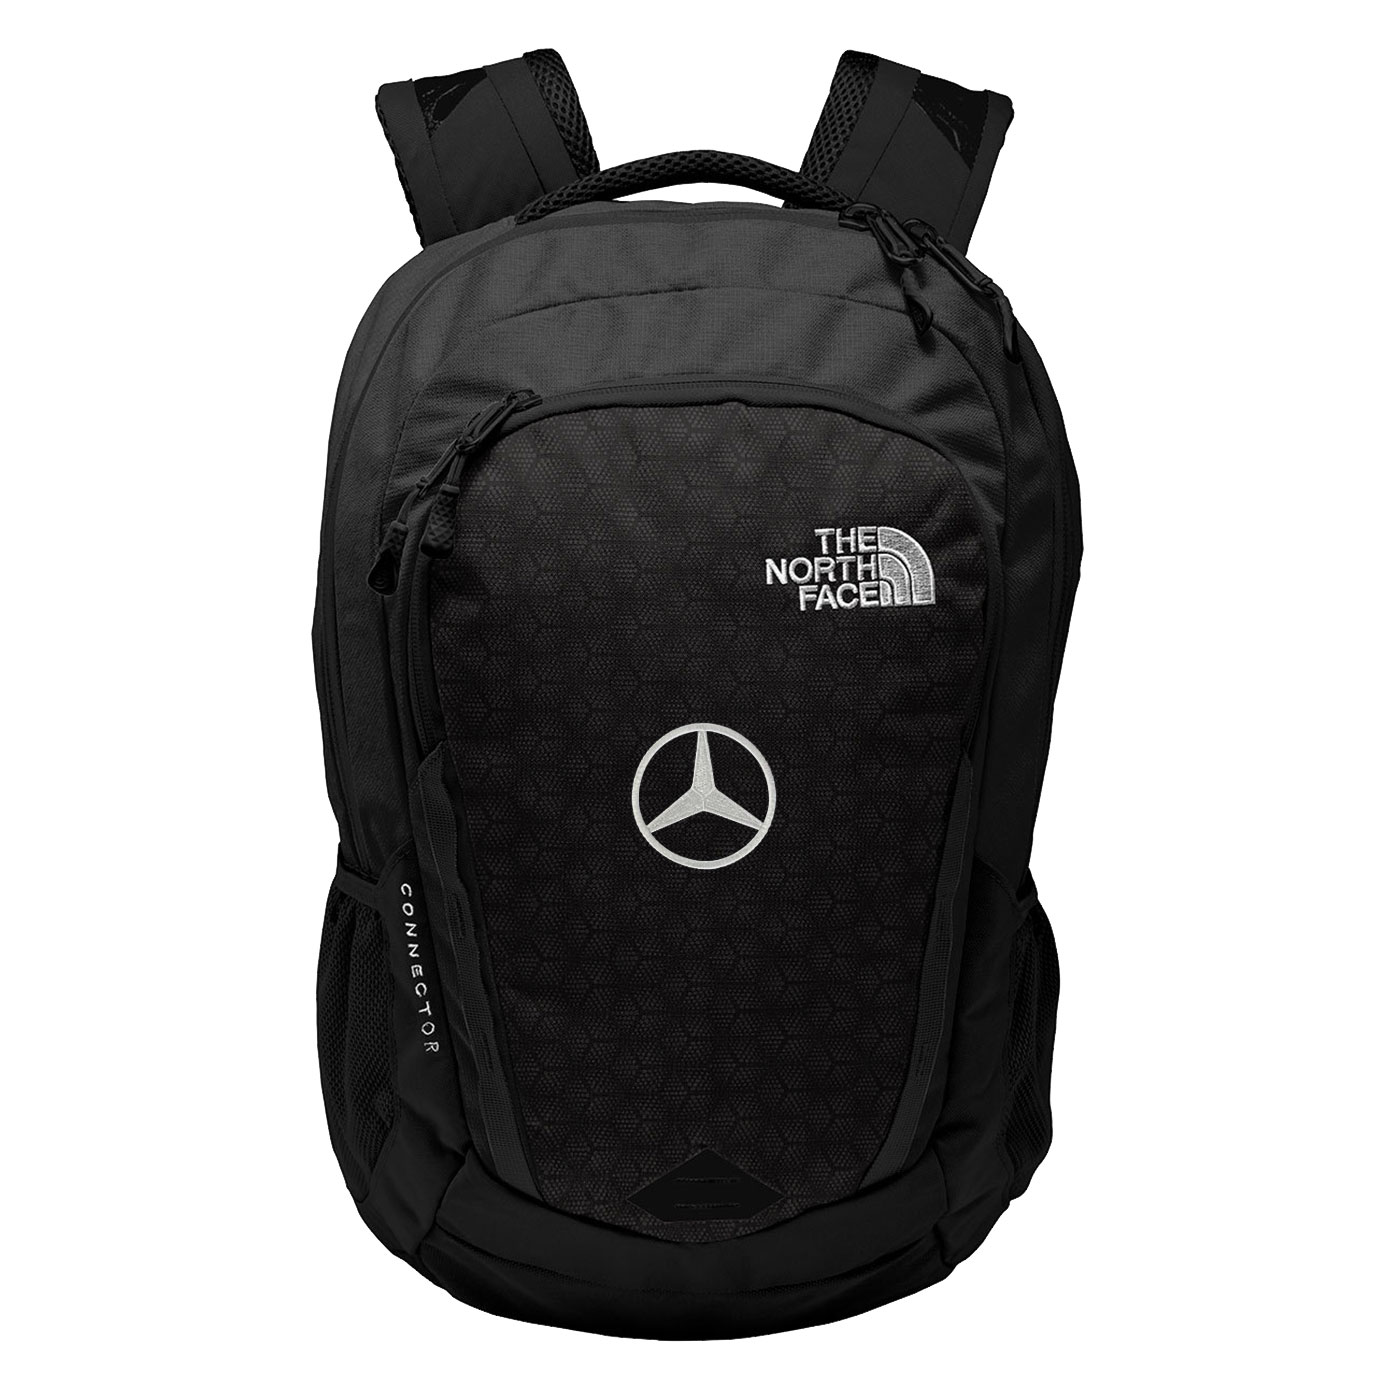 Star The North Face Connector Backpack